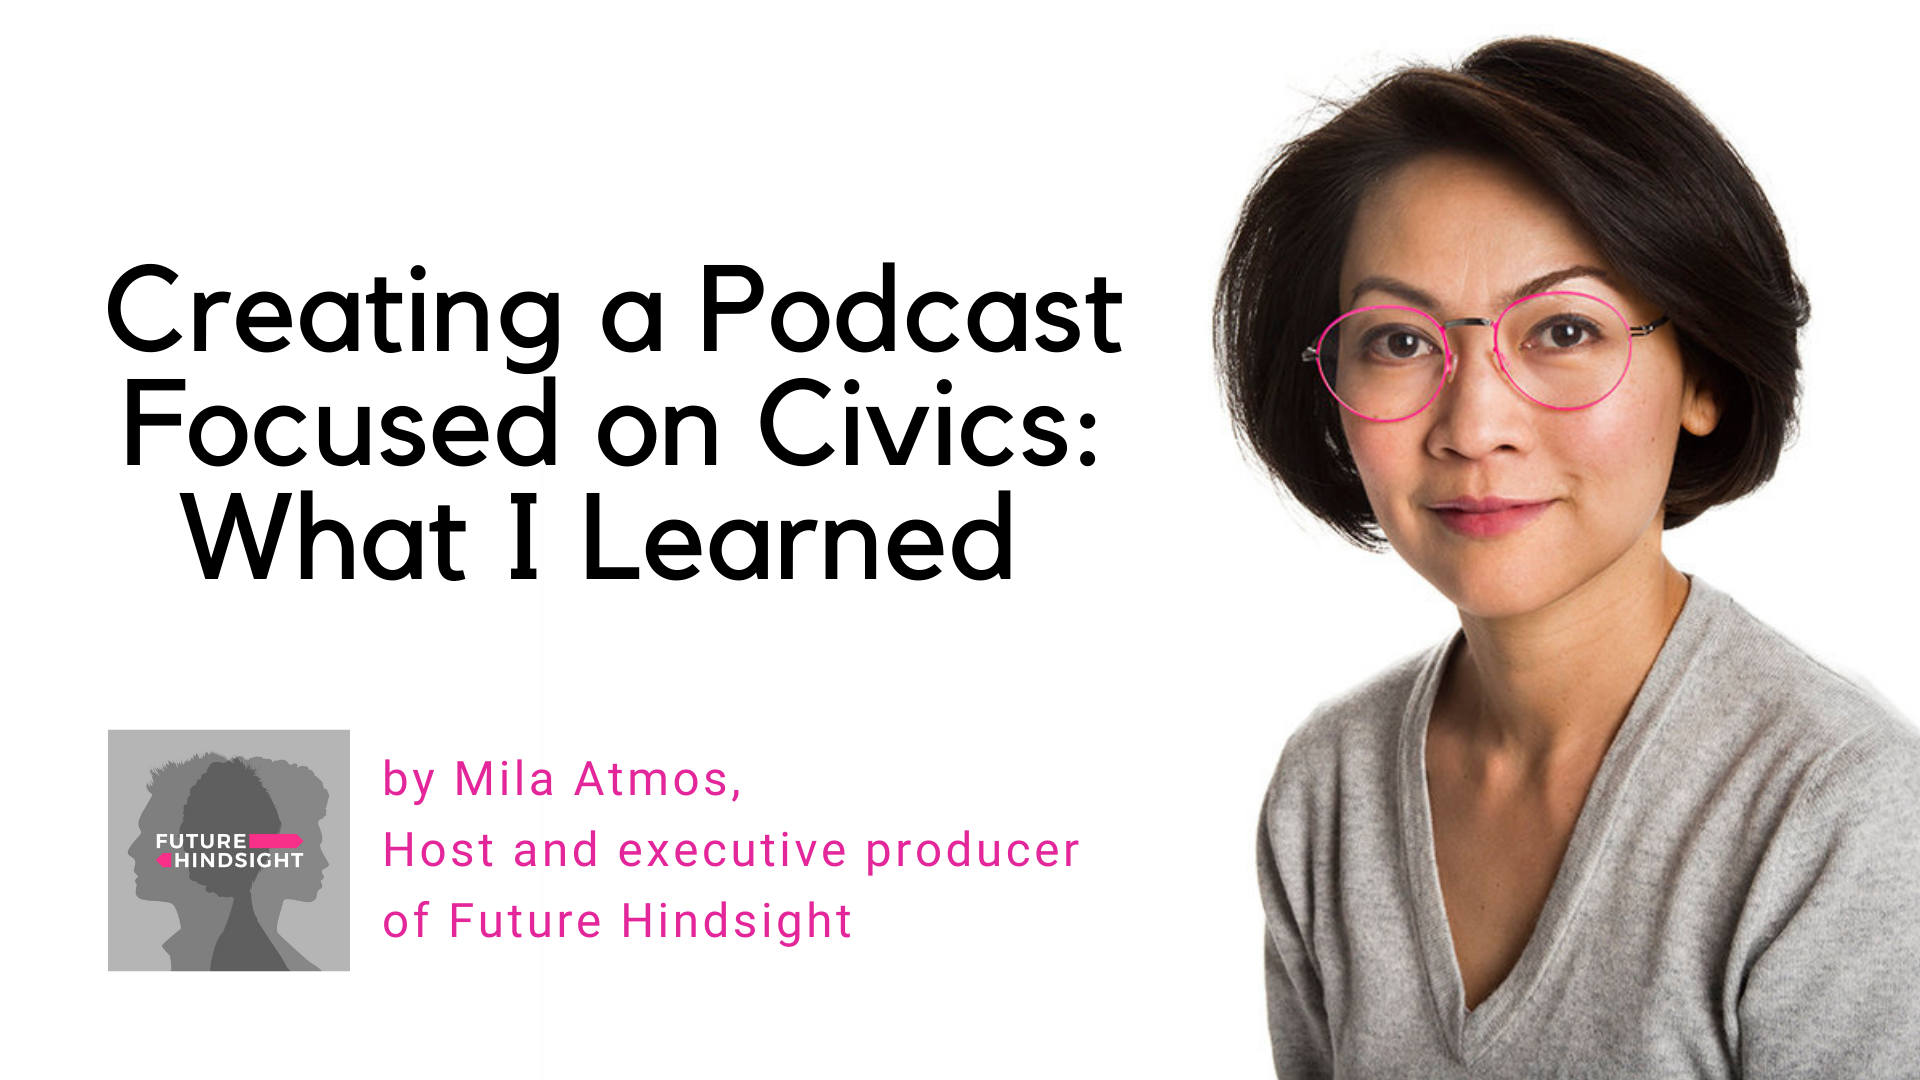 Creating a Podcast Focused on Civics: What I Learned